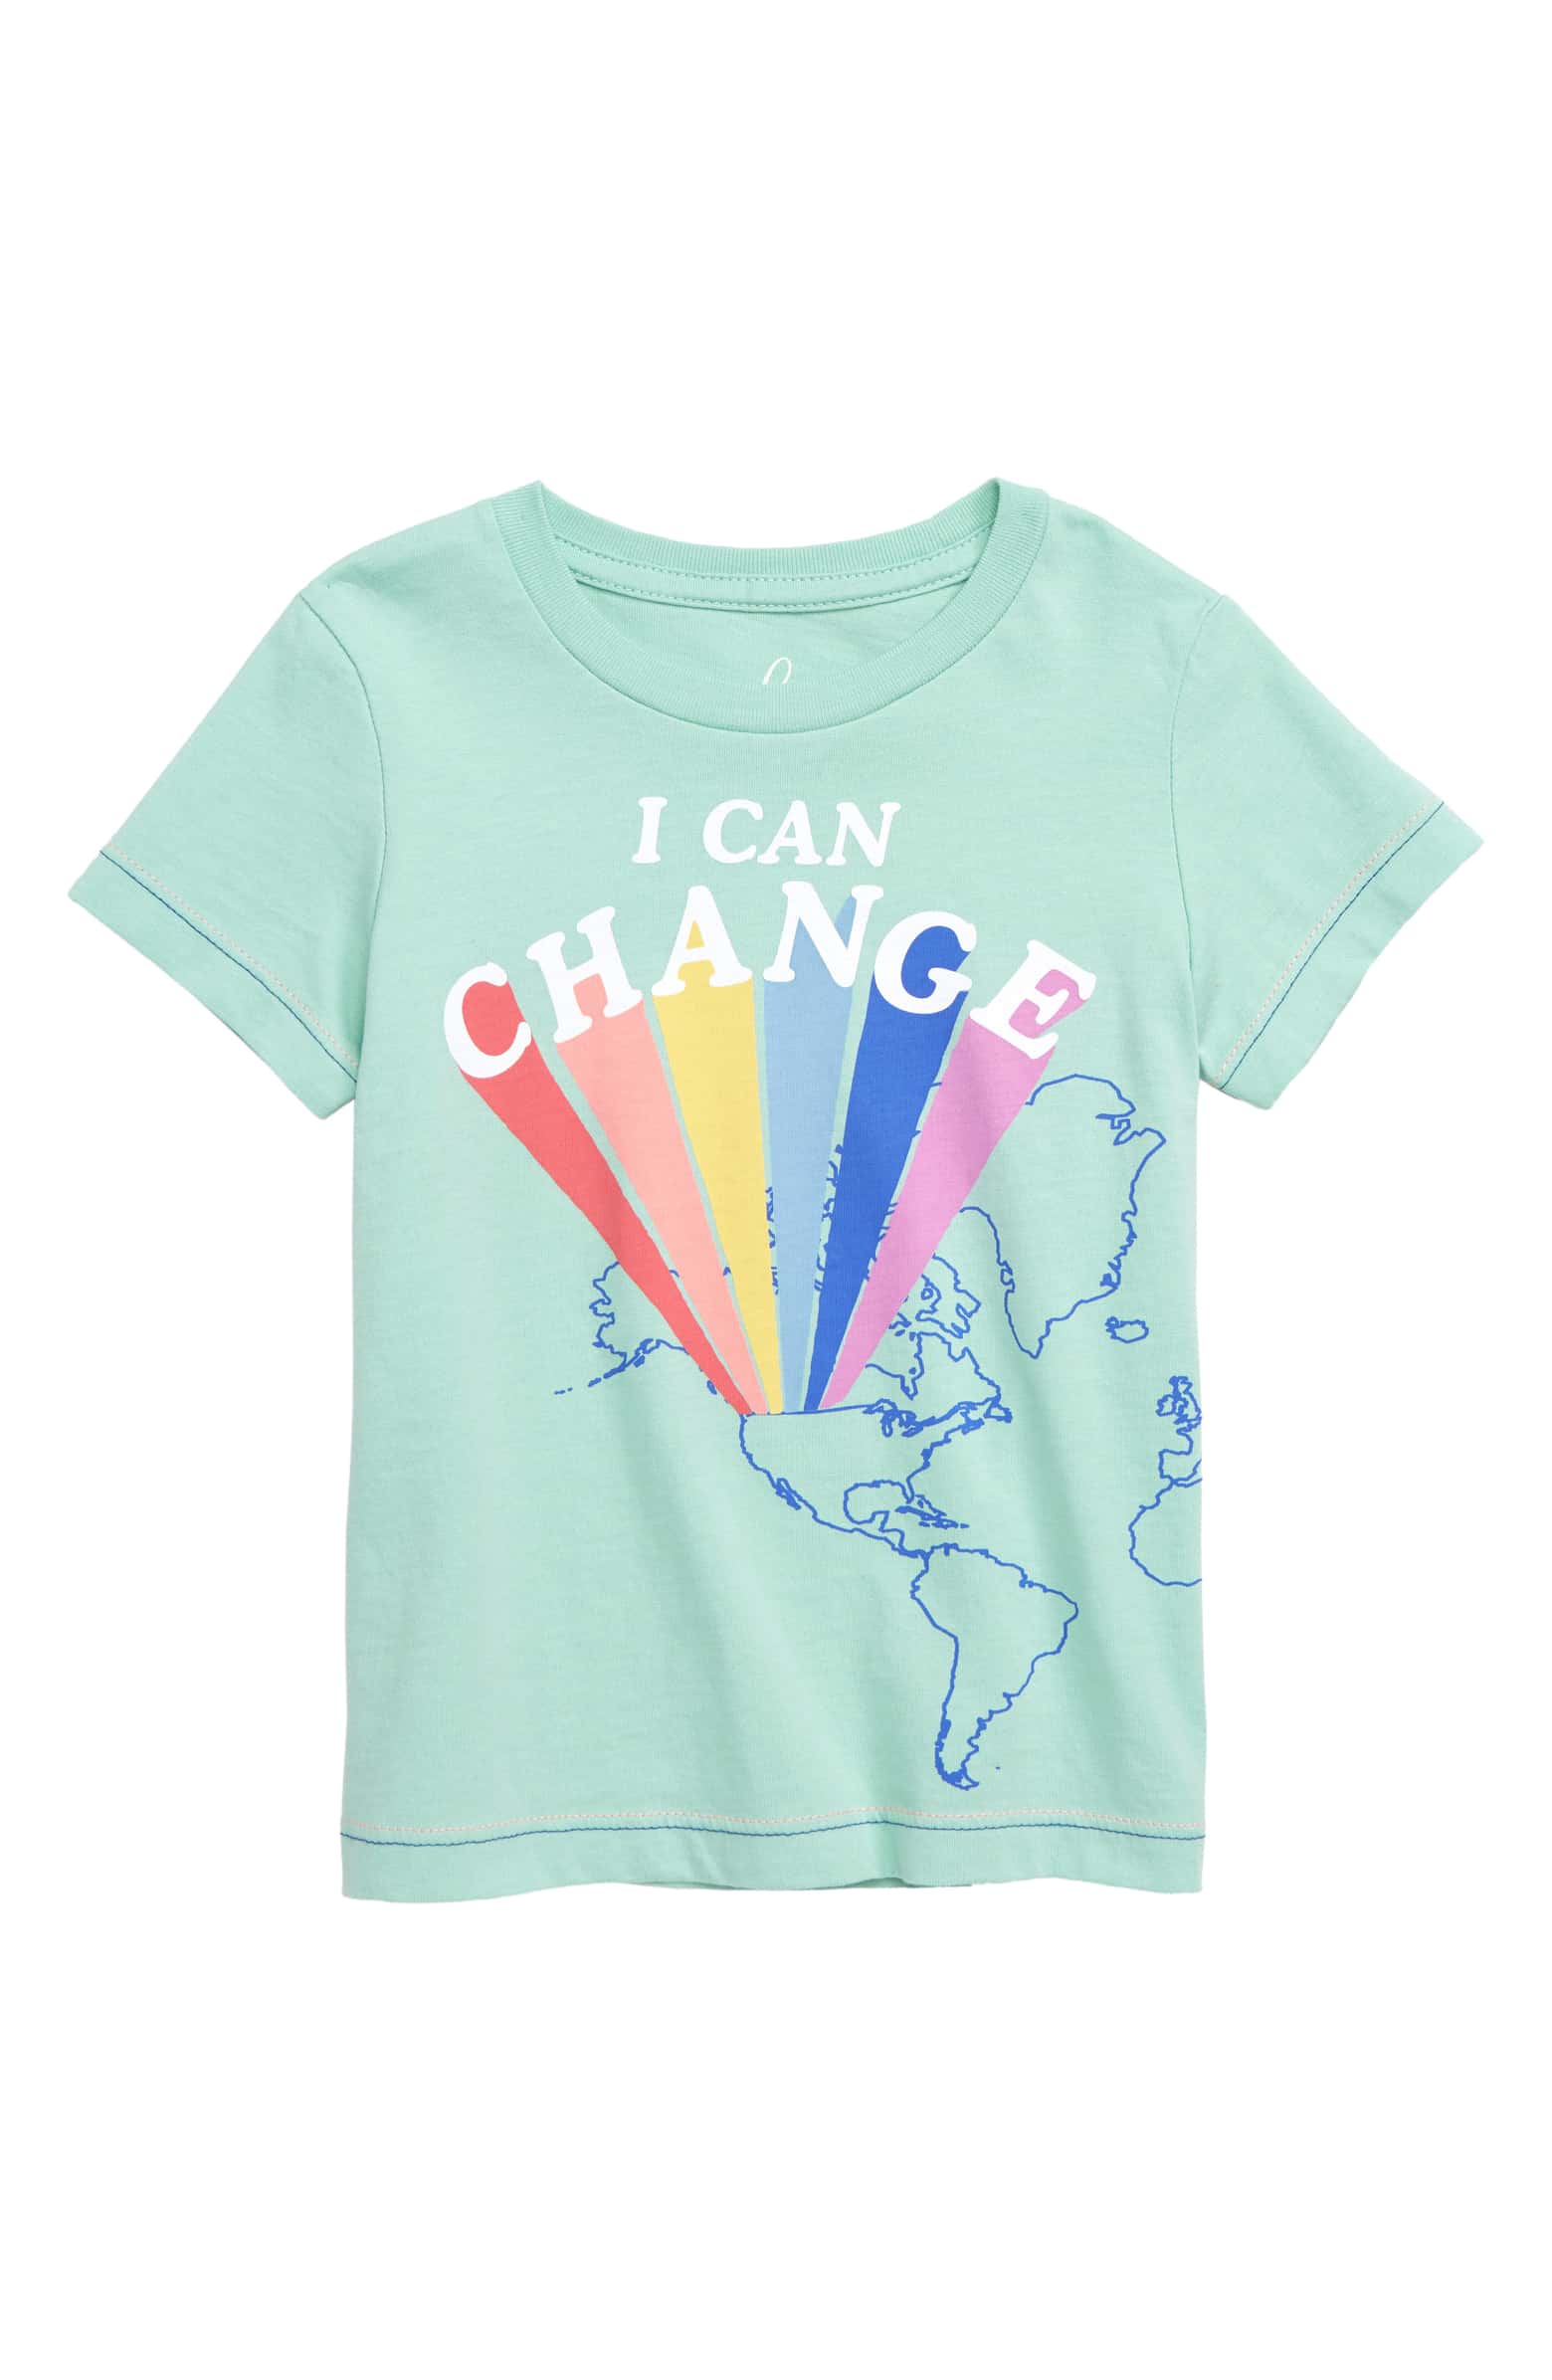 10 Powerful T-Shirts for the Mini Feminist in Your Life